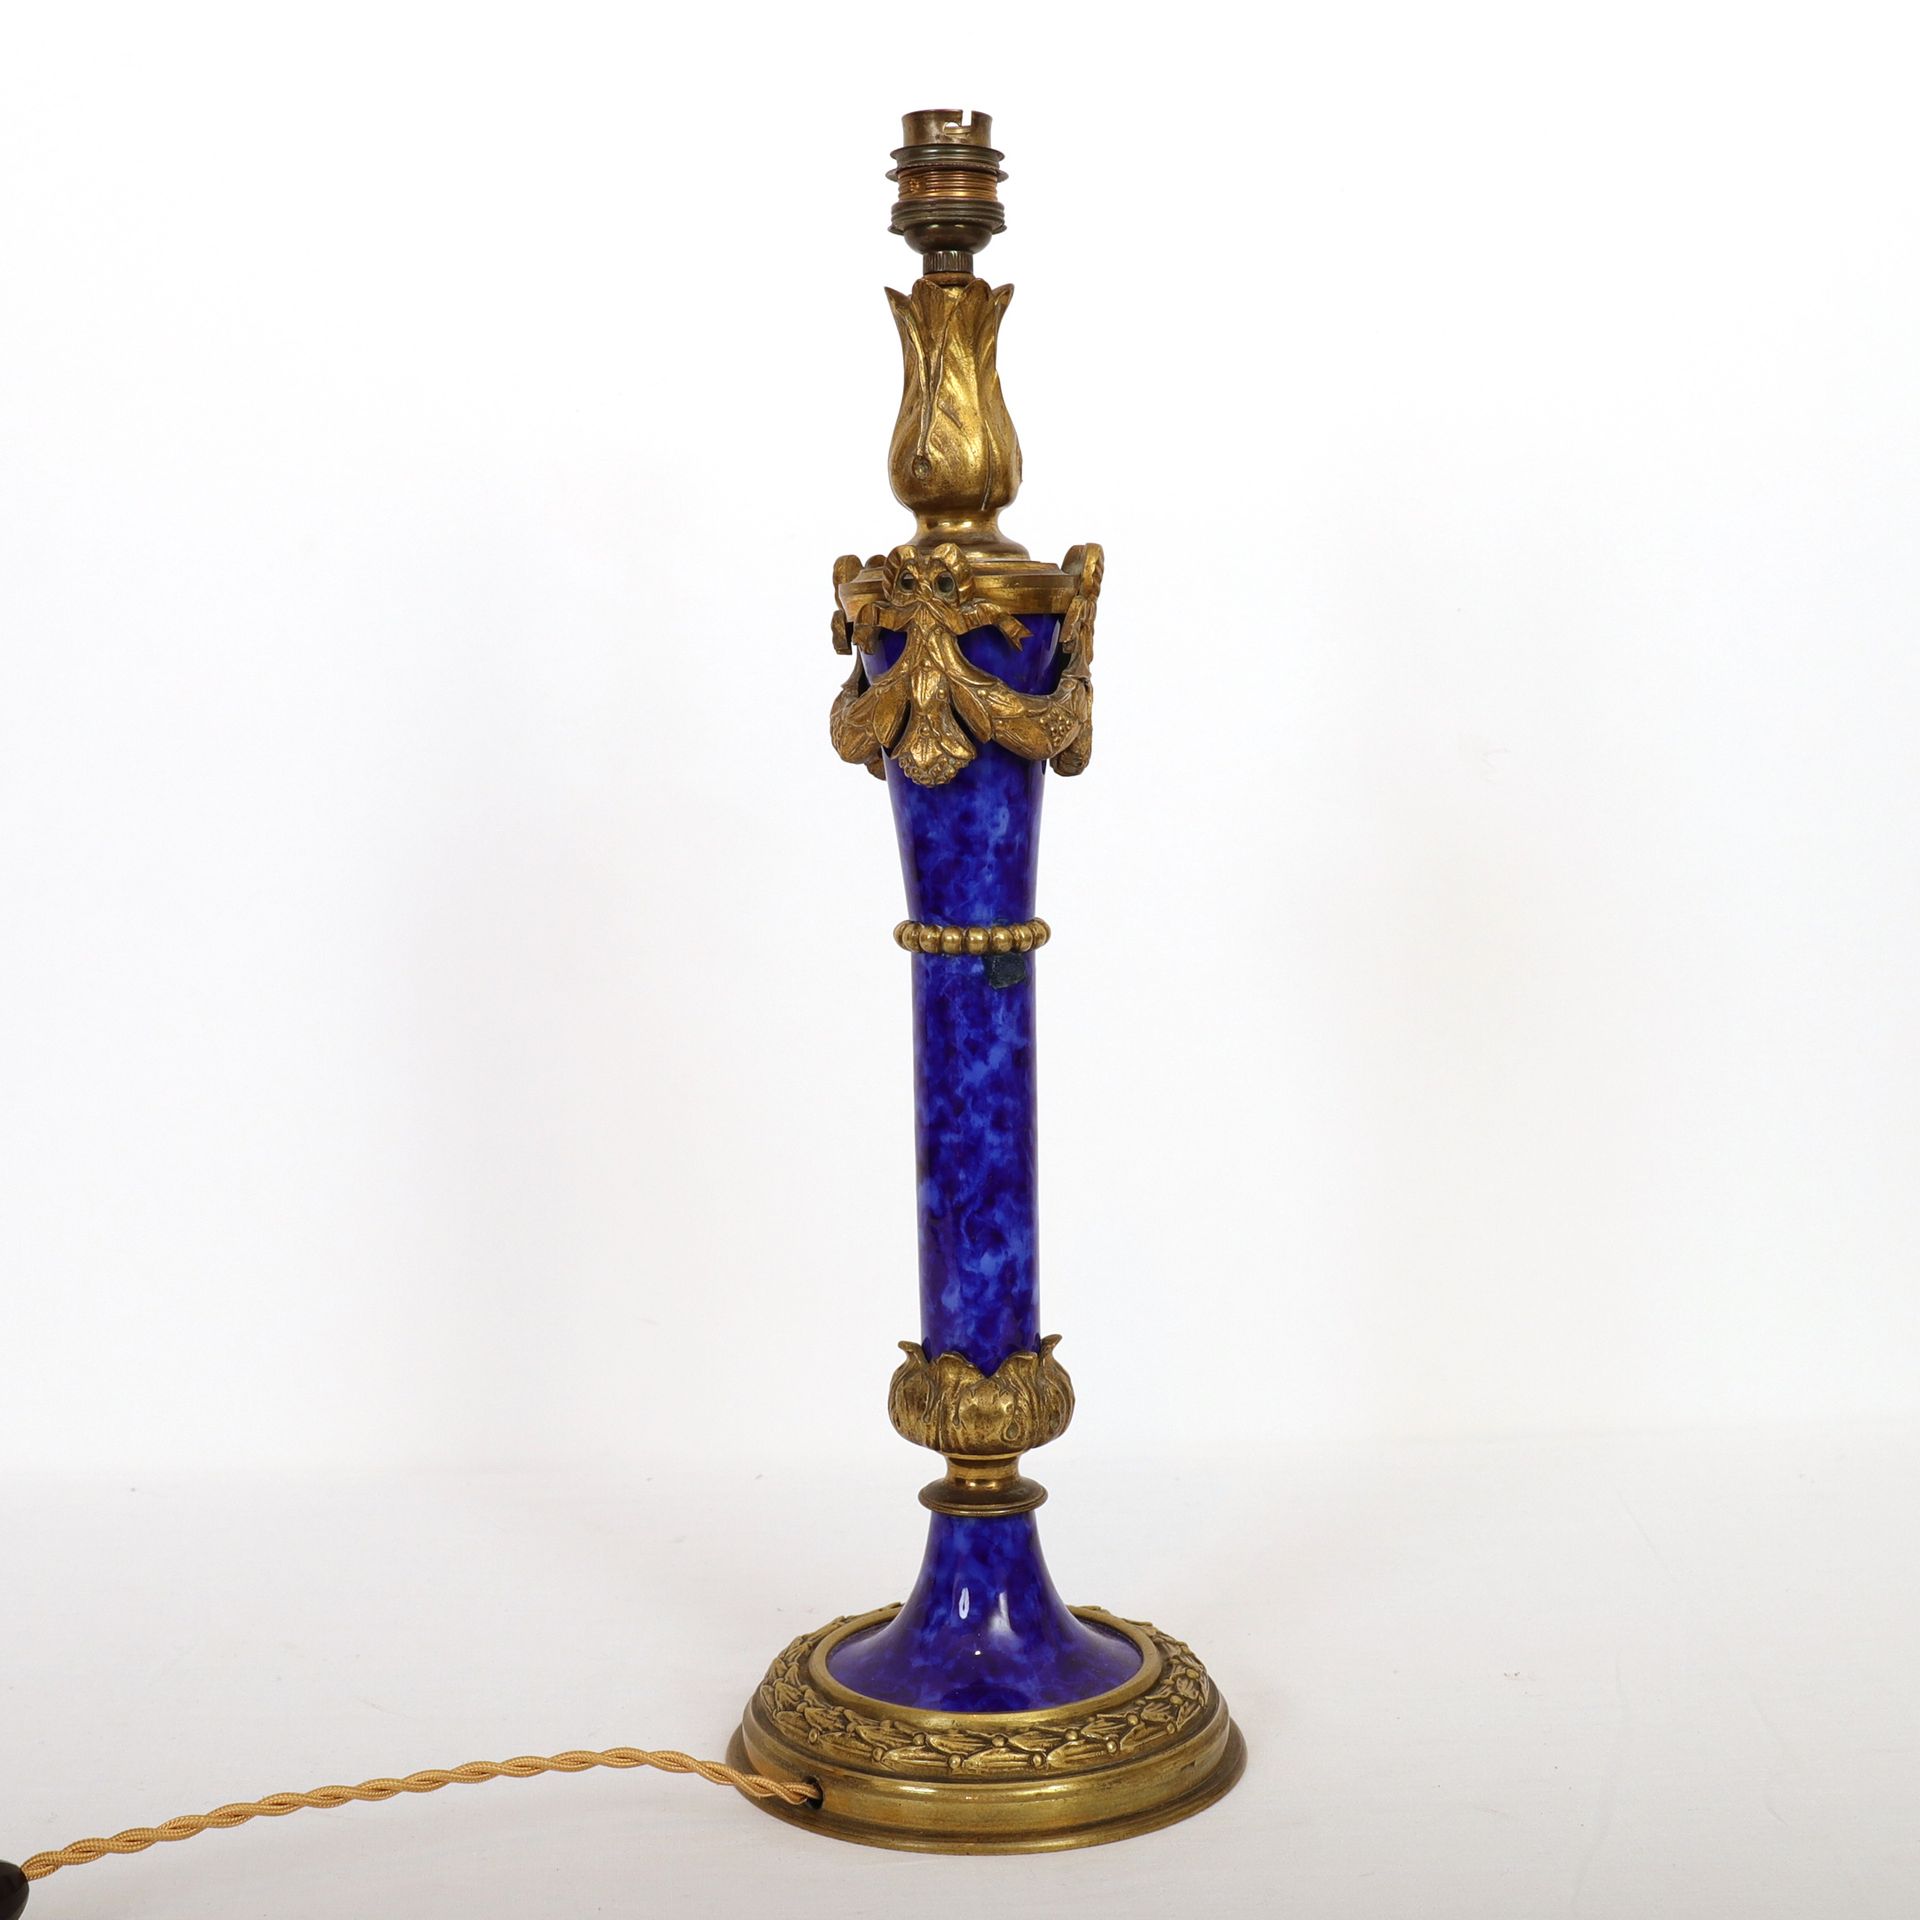 Null BLUE EARTHENWARE AND GILT BRONZE LAMP BASE

Decorated with garlands, frieze&hellip;